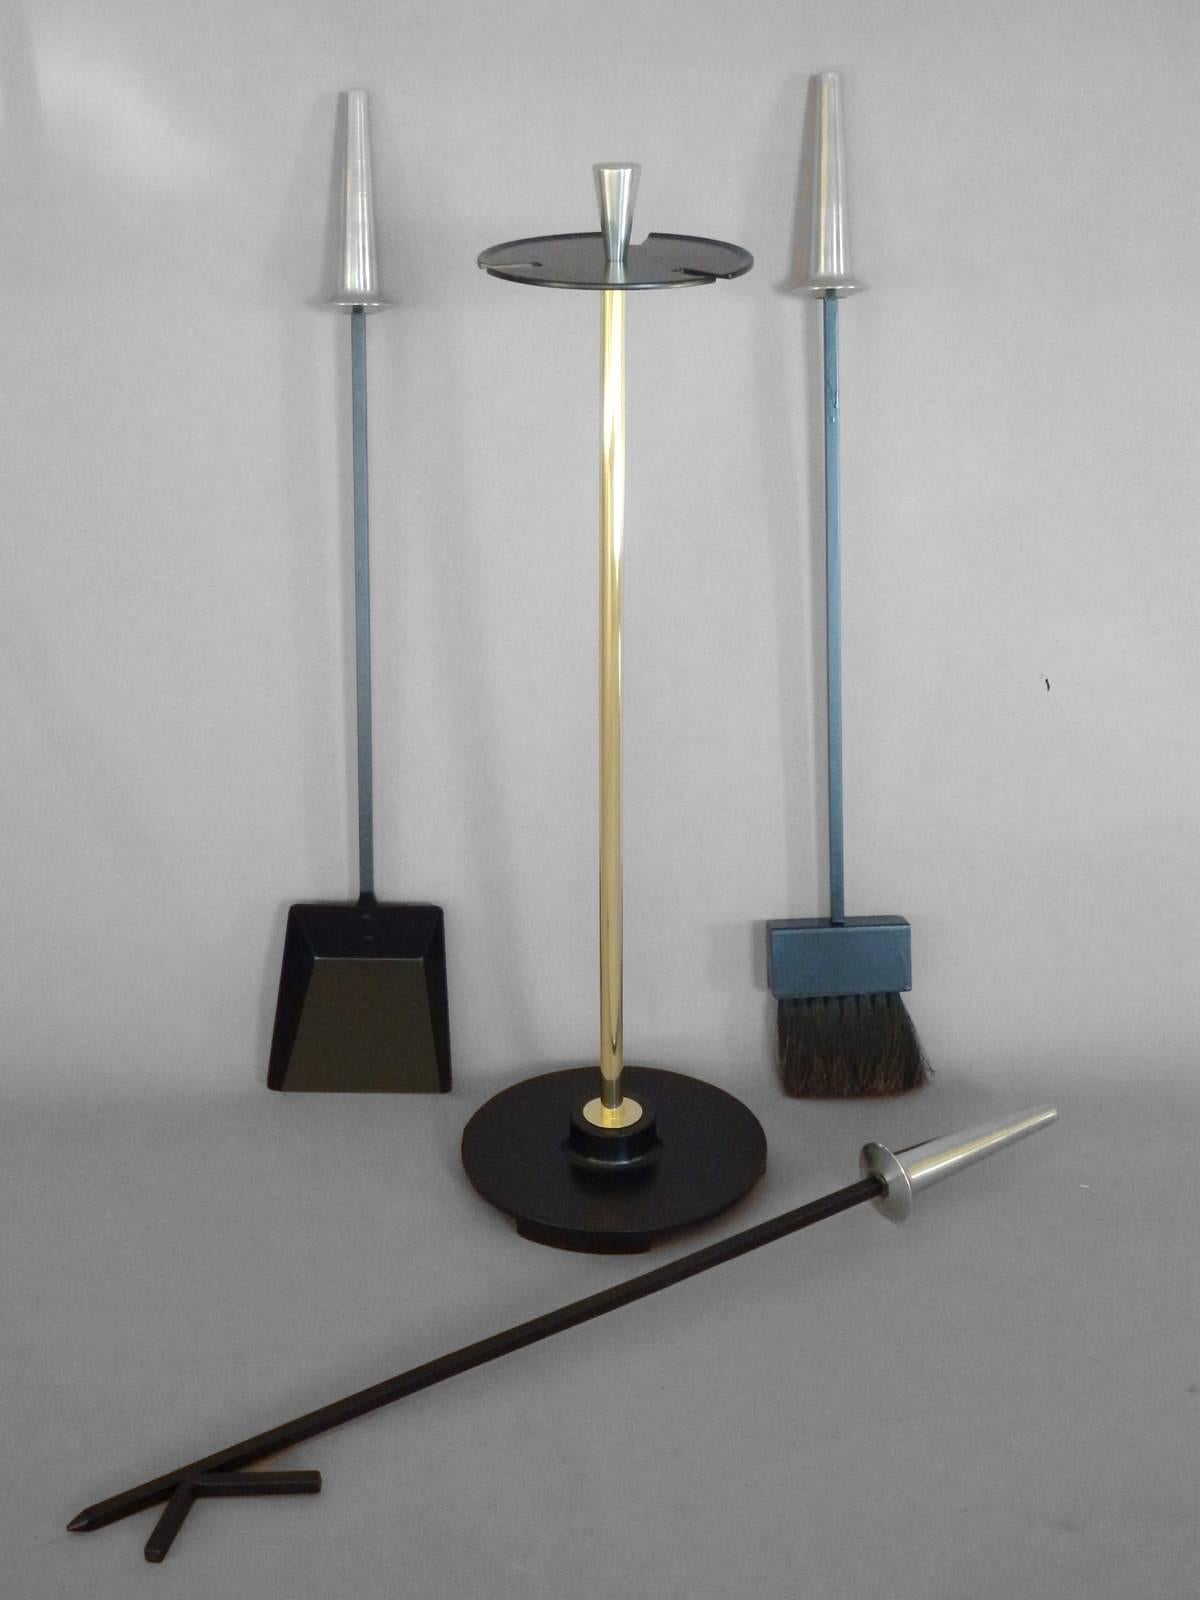 Set of Modernist fire tools attributed to the Pilgrim Company
Base: 8.5” diameter x 31” tall 
Each tool: 28.75